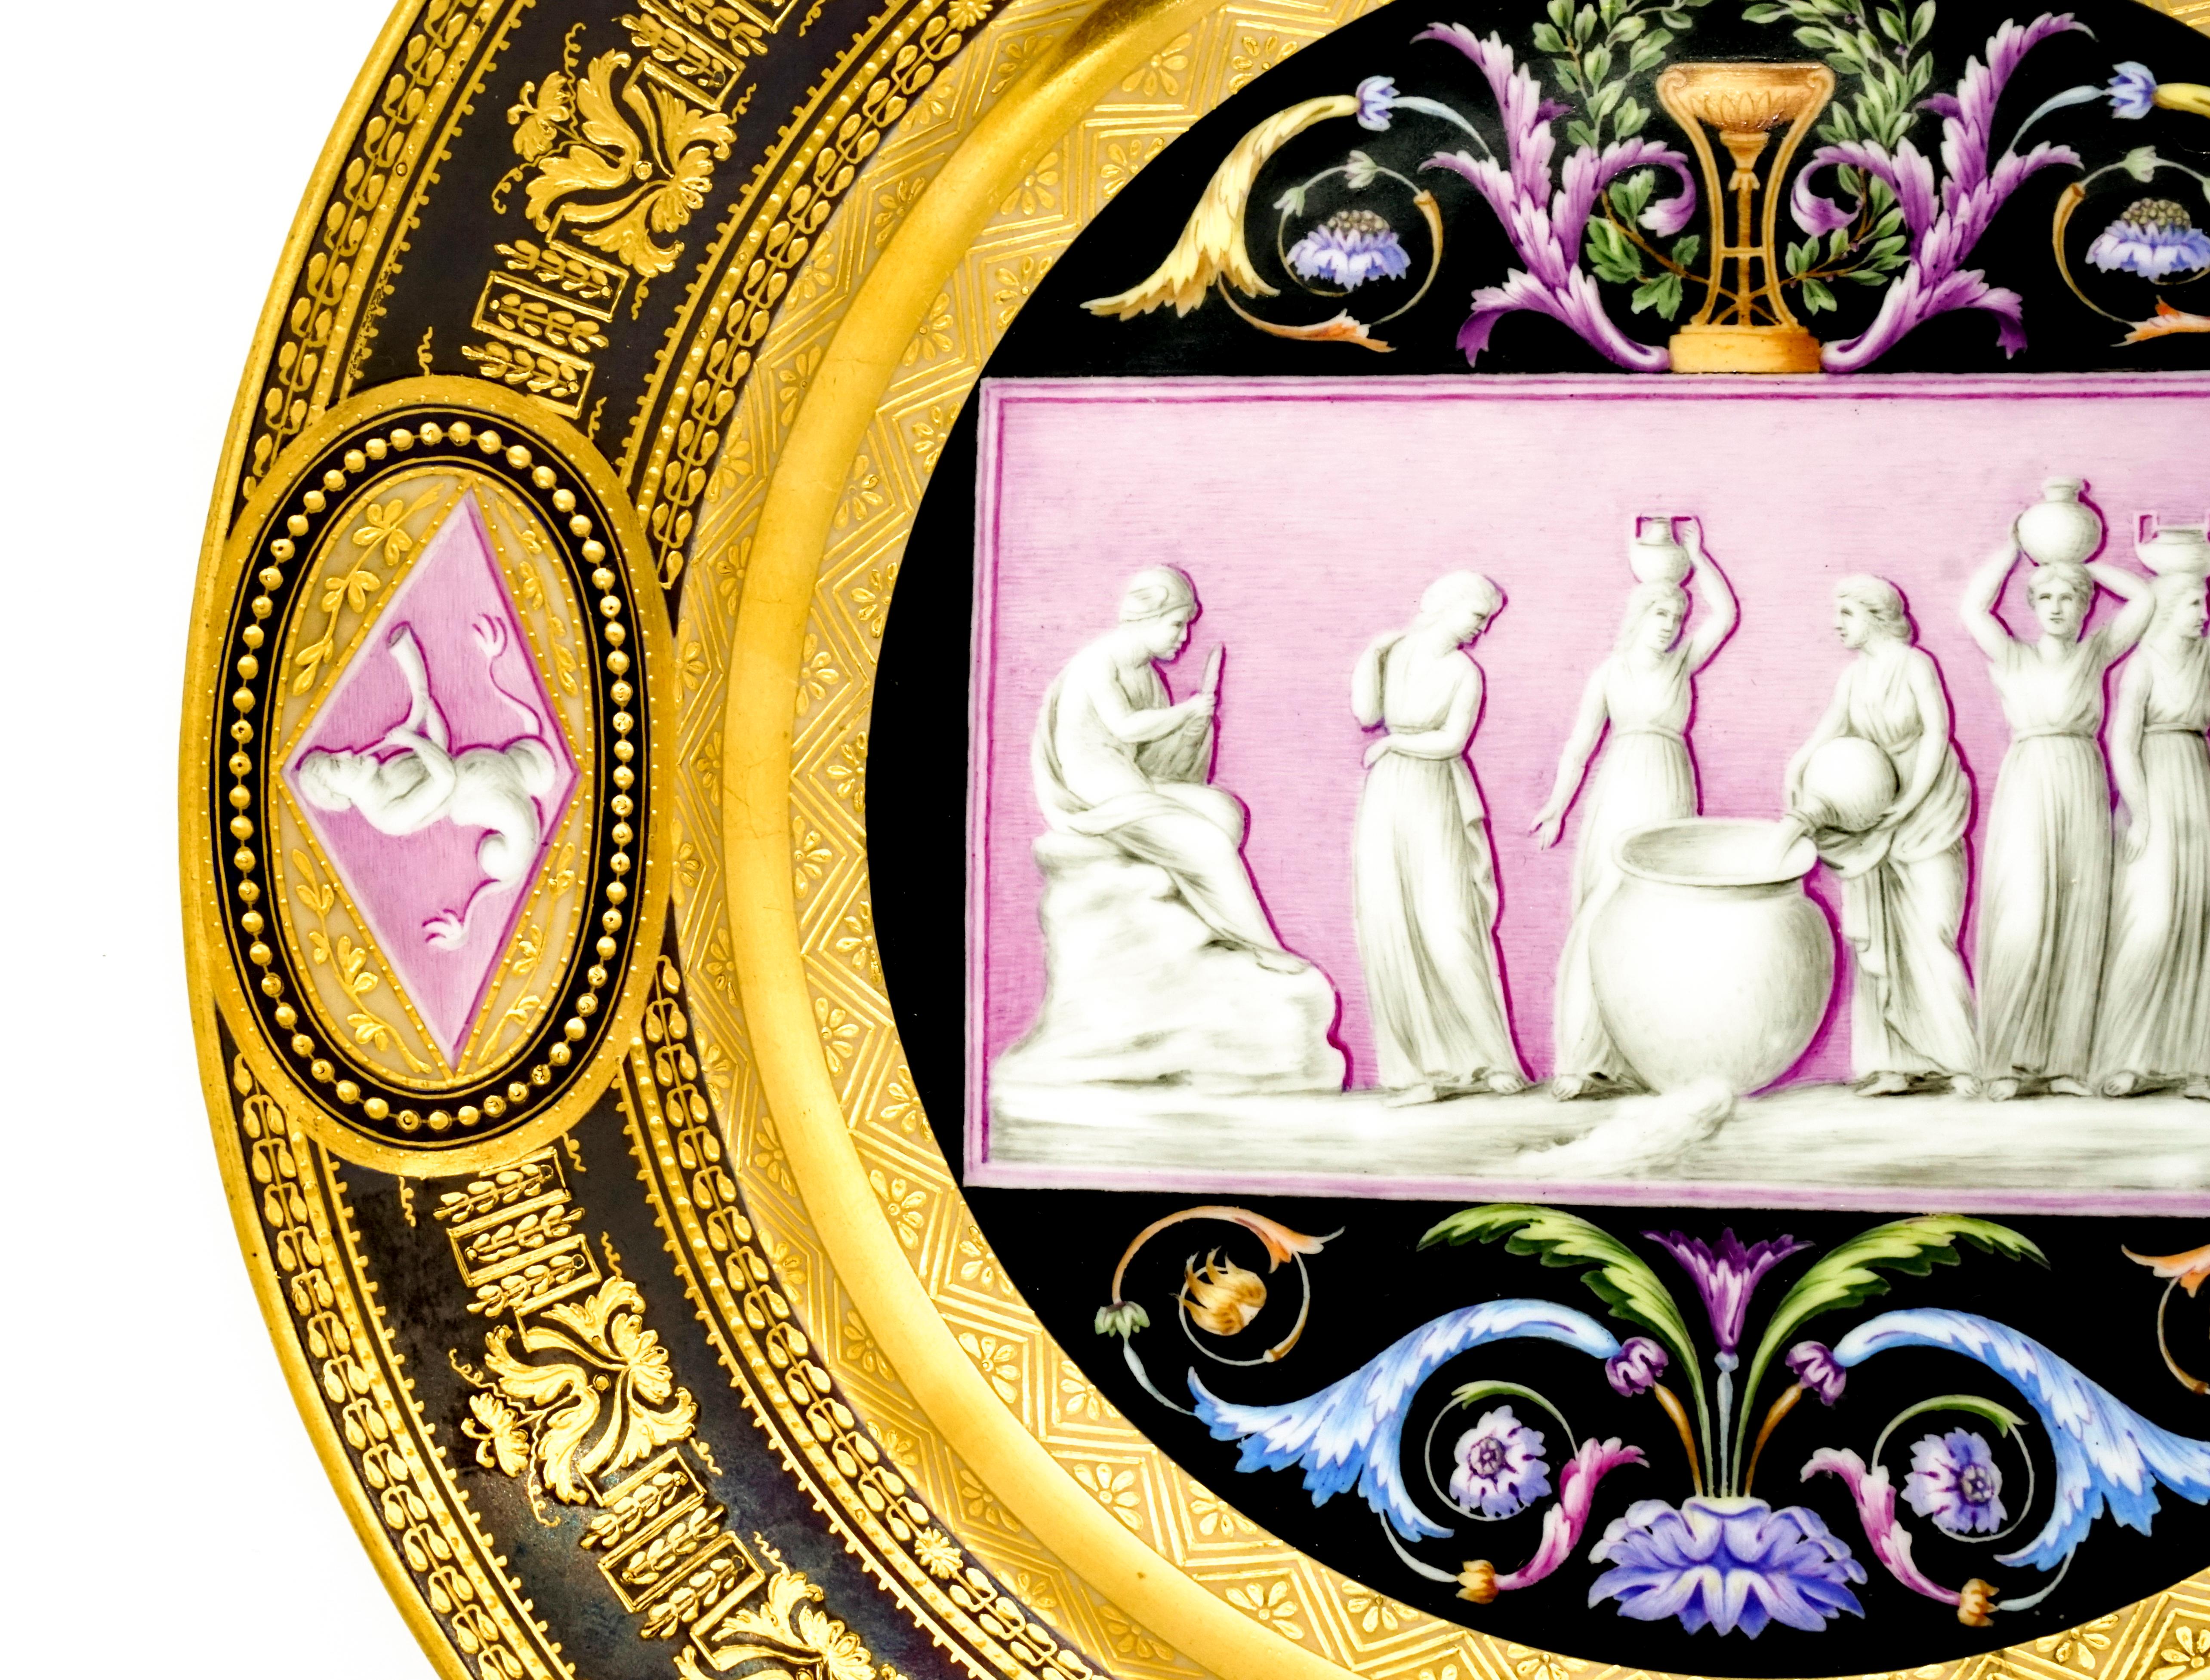 Early 19th Century Viennese Imperial Porcelain Splendour Plate, Wien Sorgenthal Period, 1805